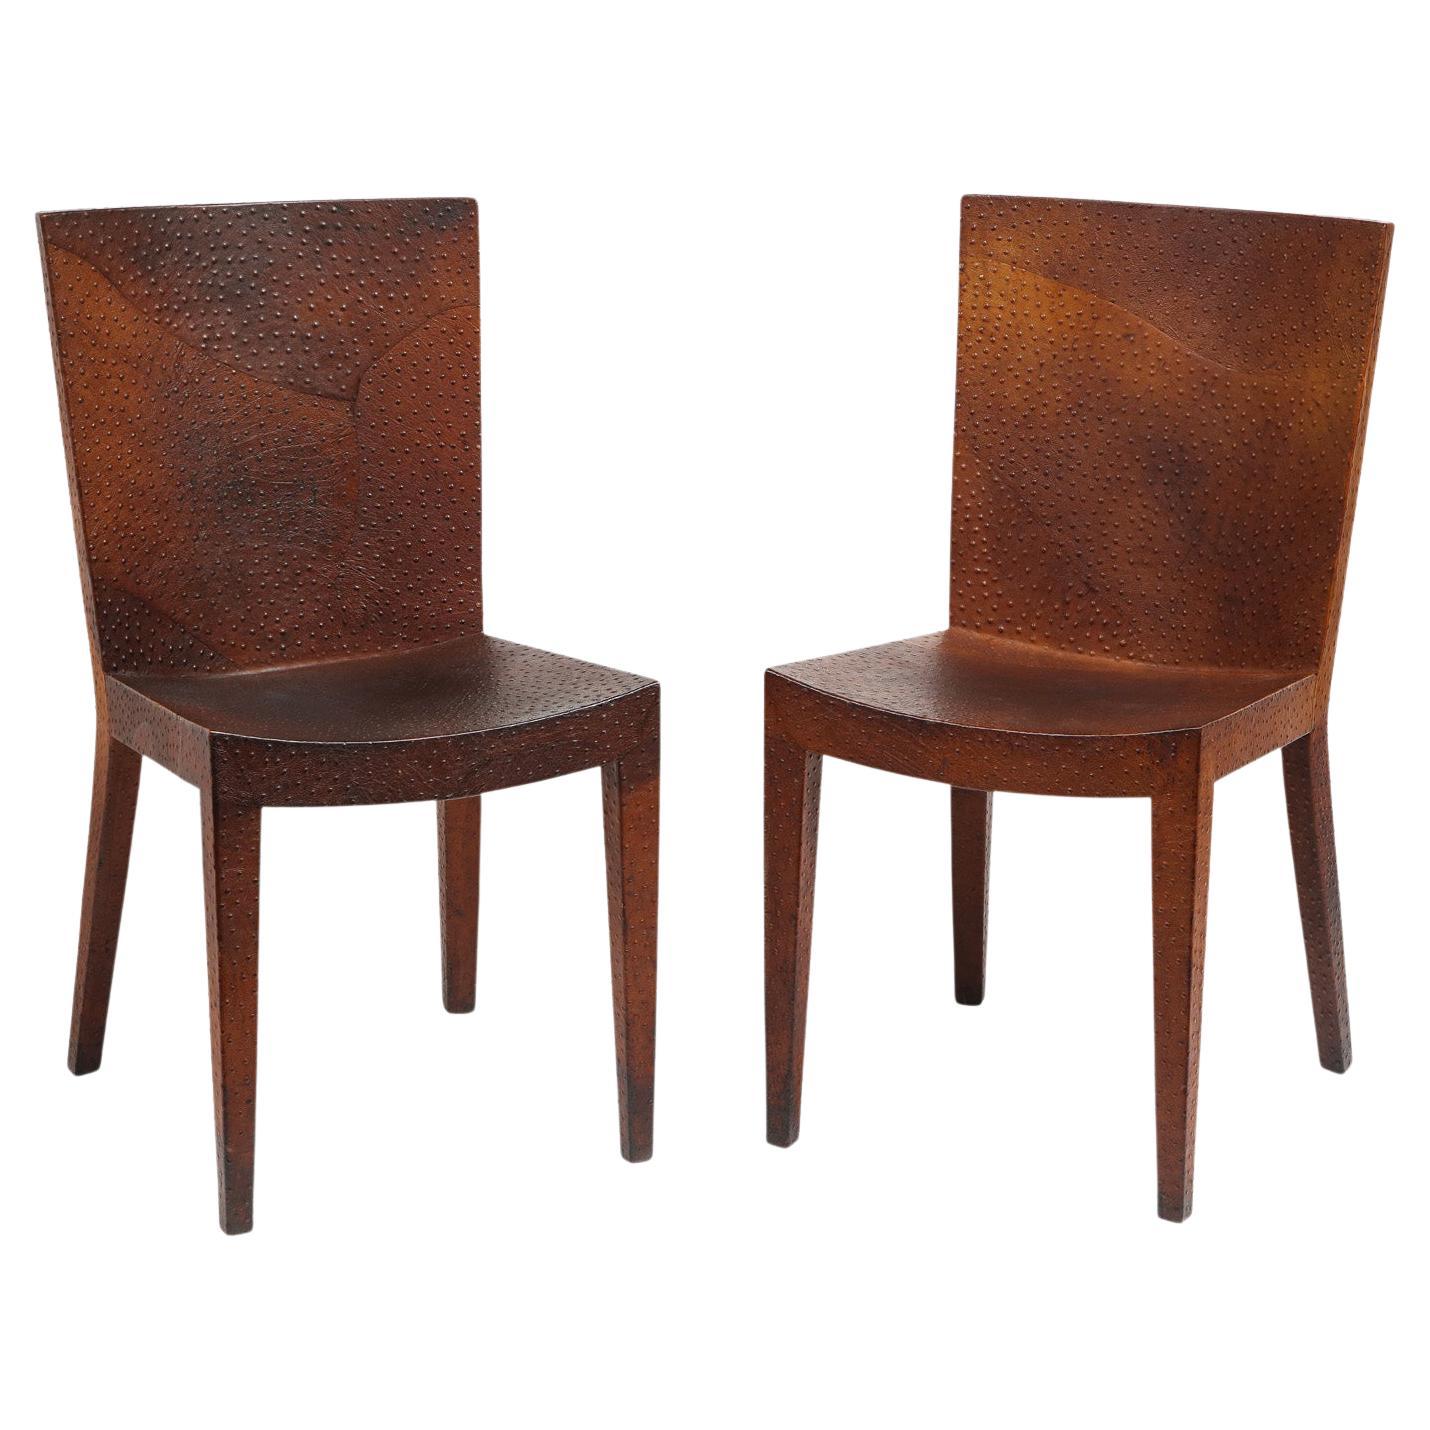 Karl Springer Pair of Jmf Chairs in Ostrich Skin, 1982, 'Signed' For Sale